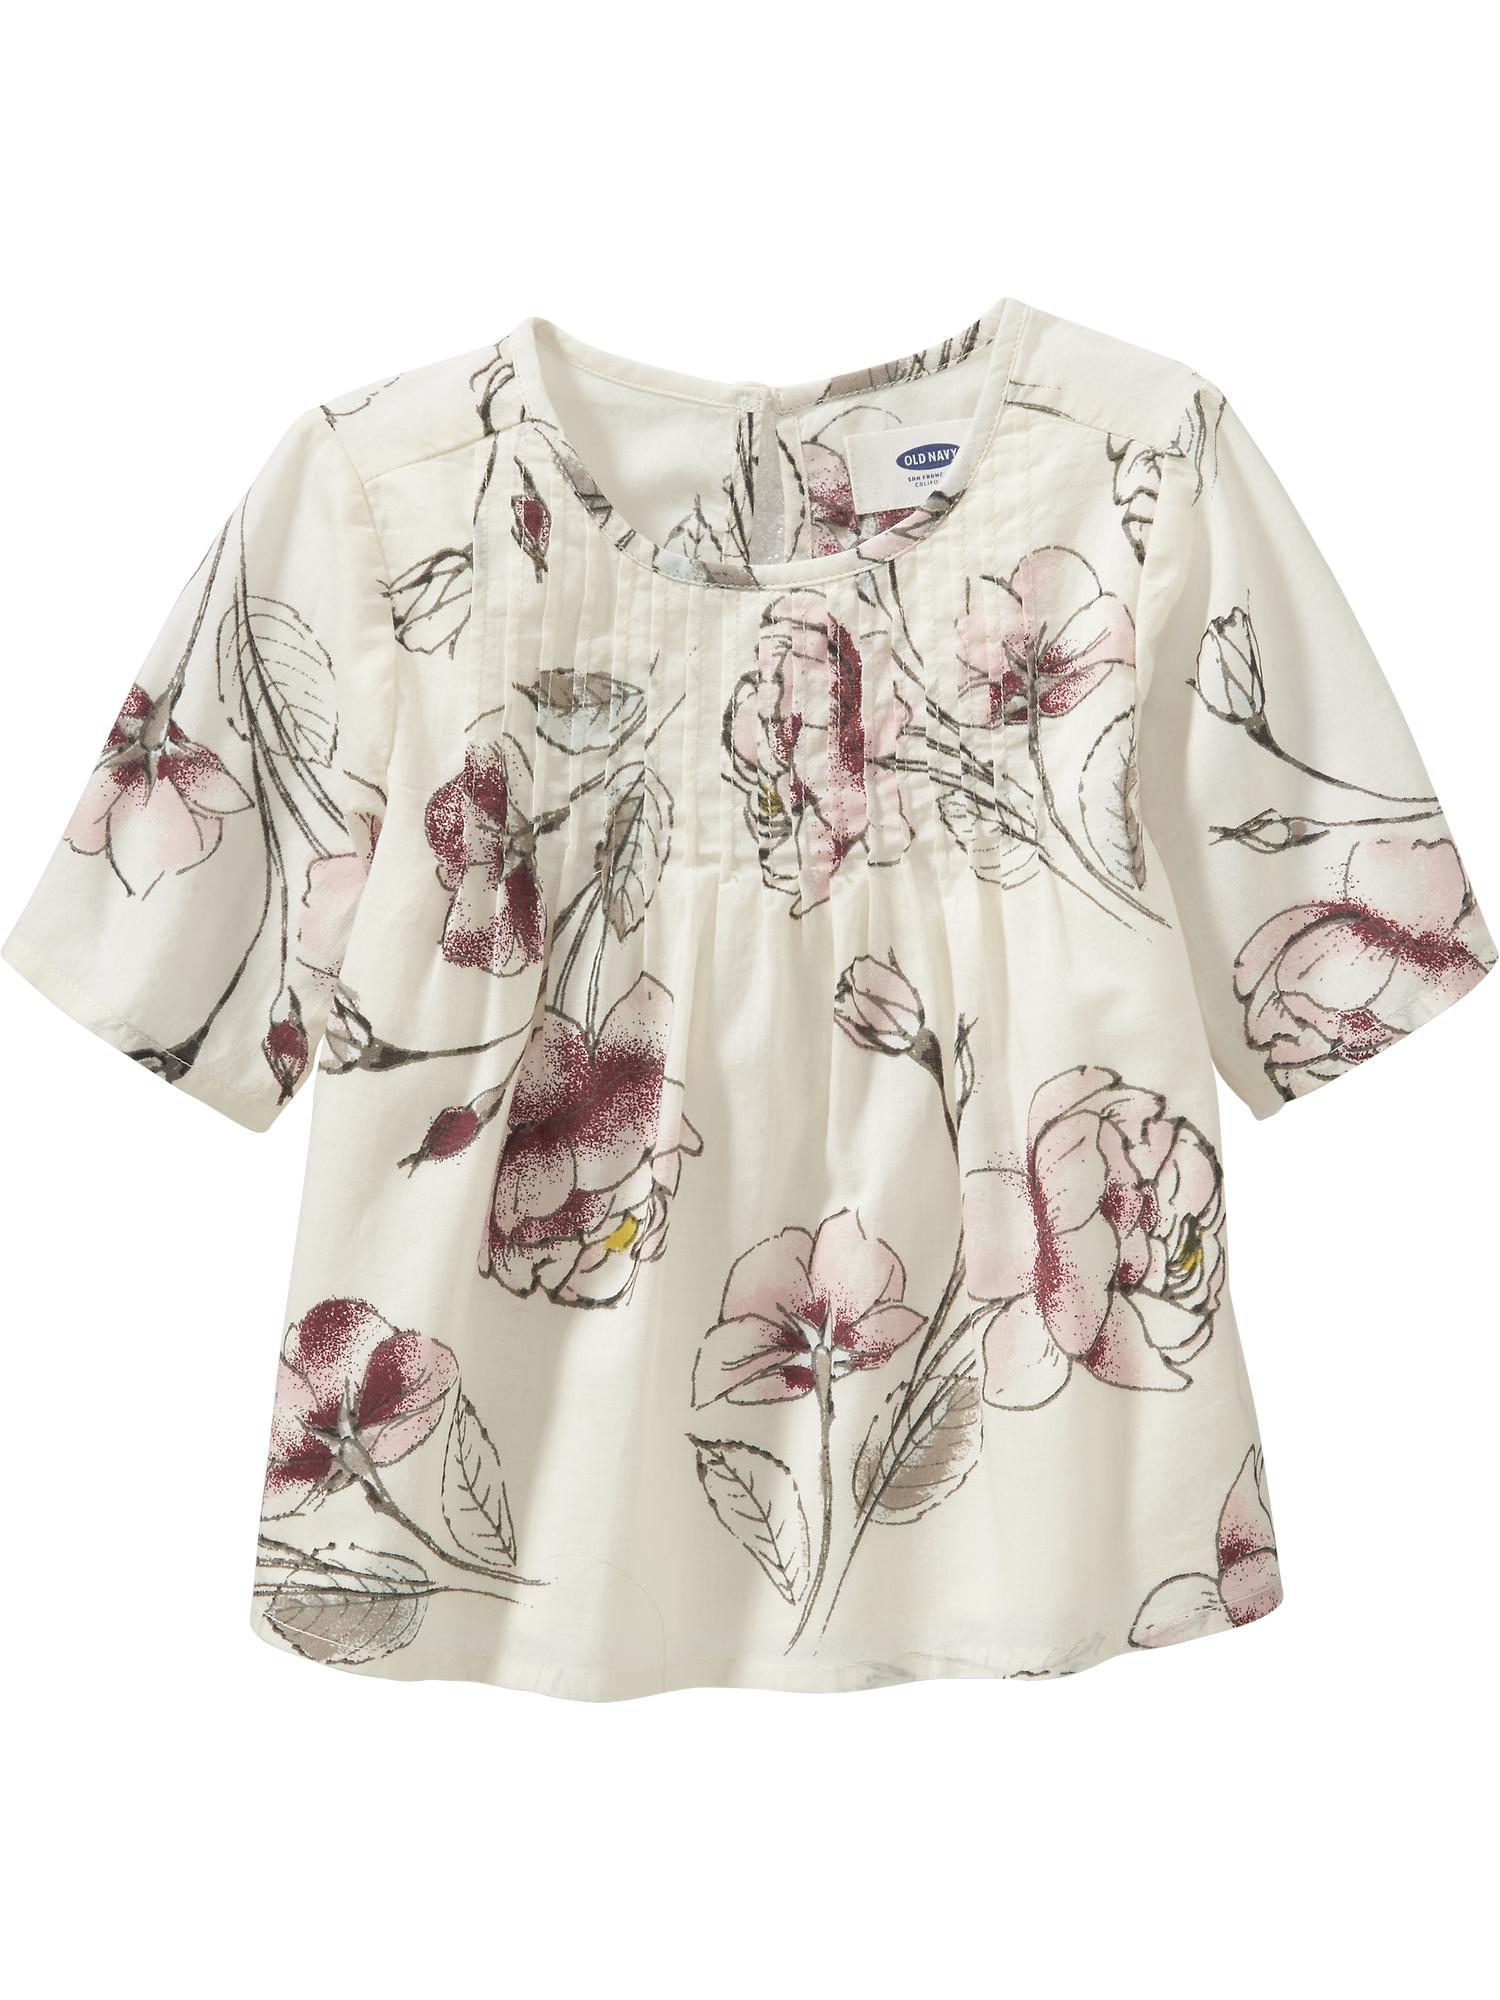 Floral Pin-Tuck Top for Baby | Old Navy